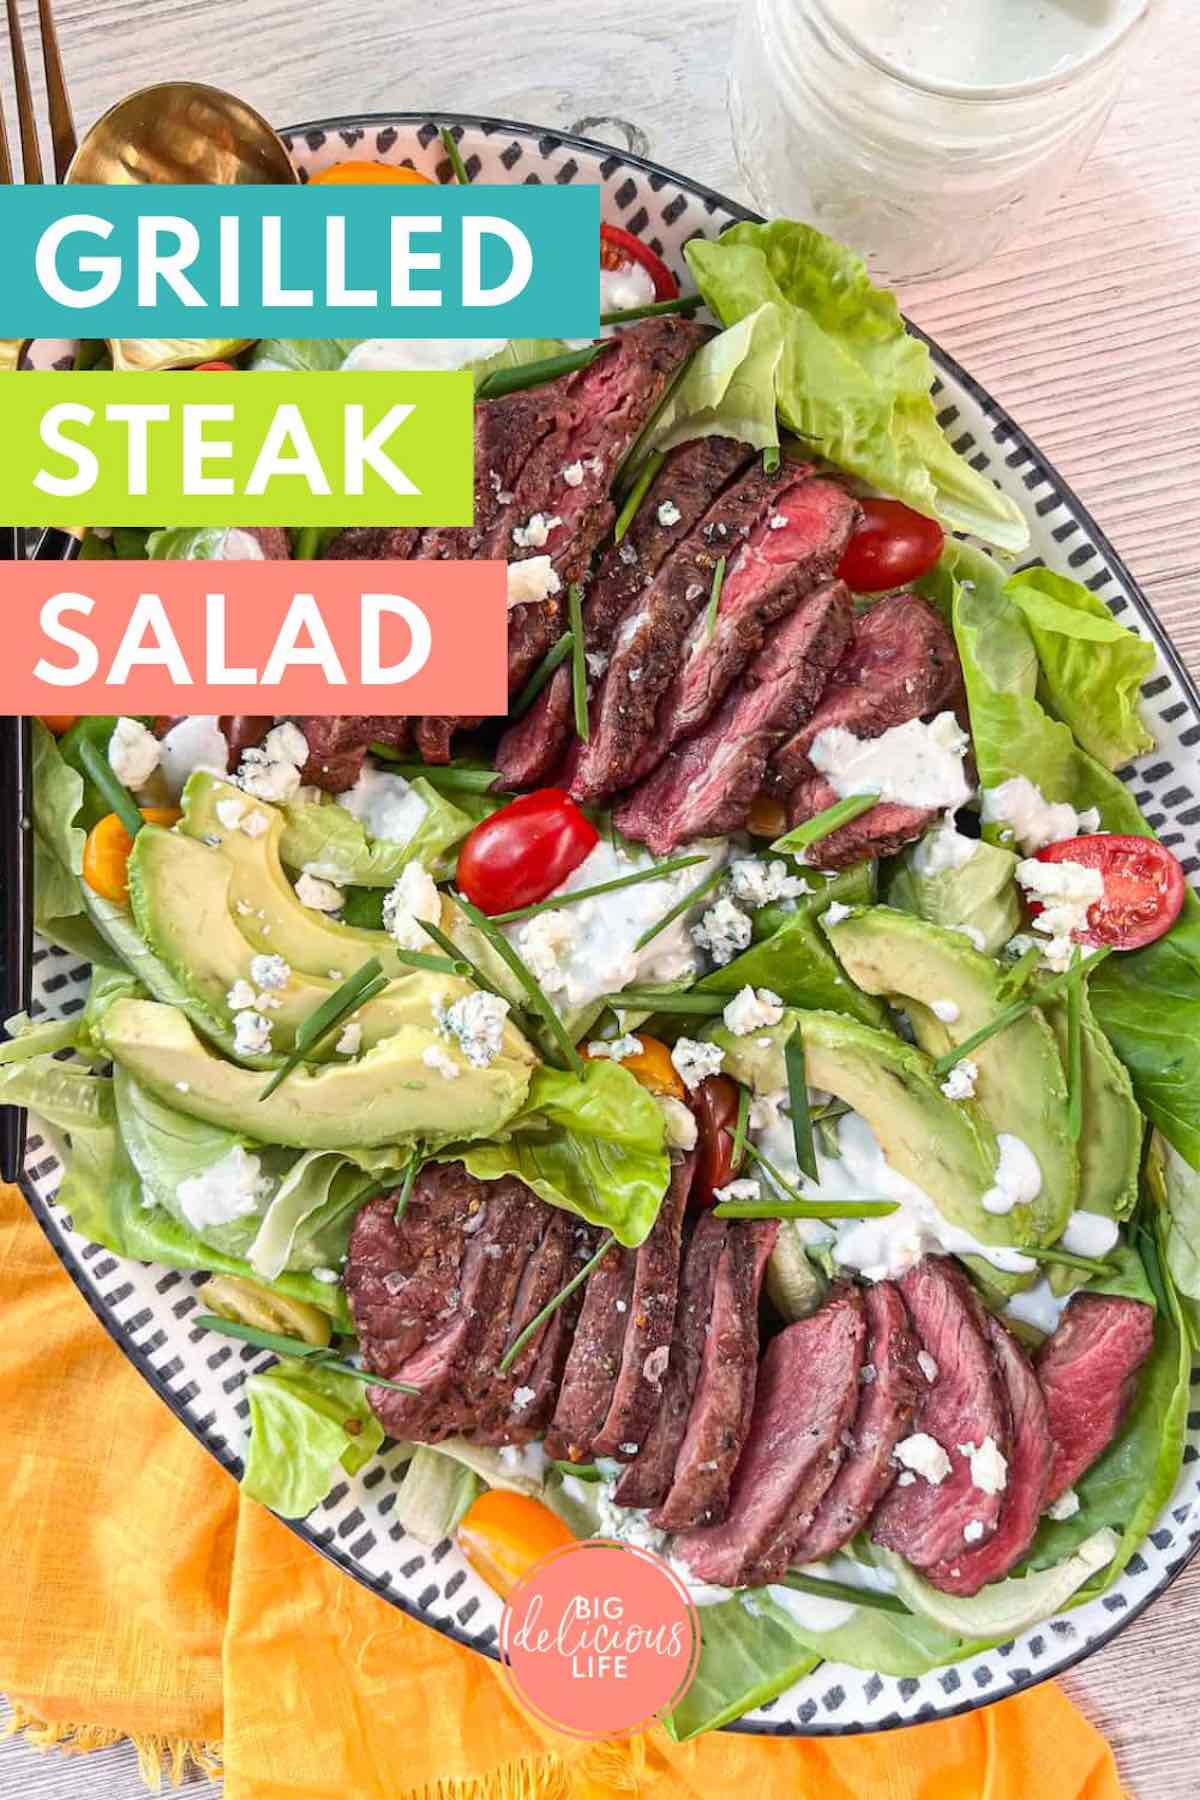 Branded Pinterest template with photo of steak salad on an oval platter with a yellow napkin.